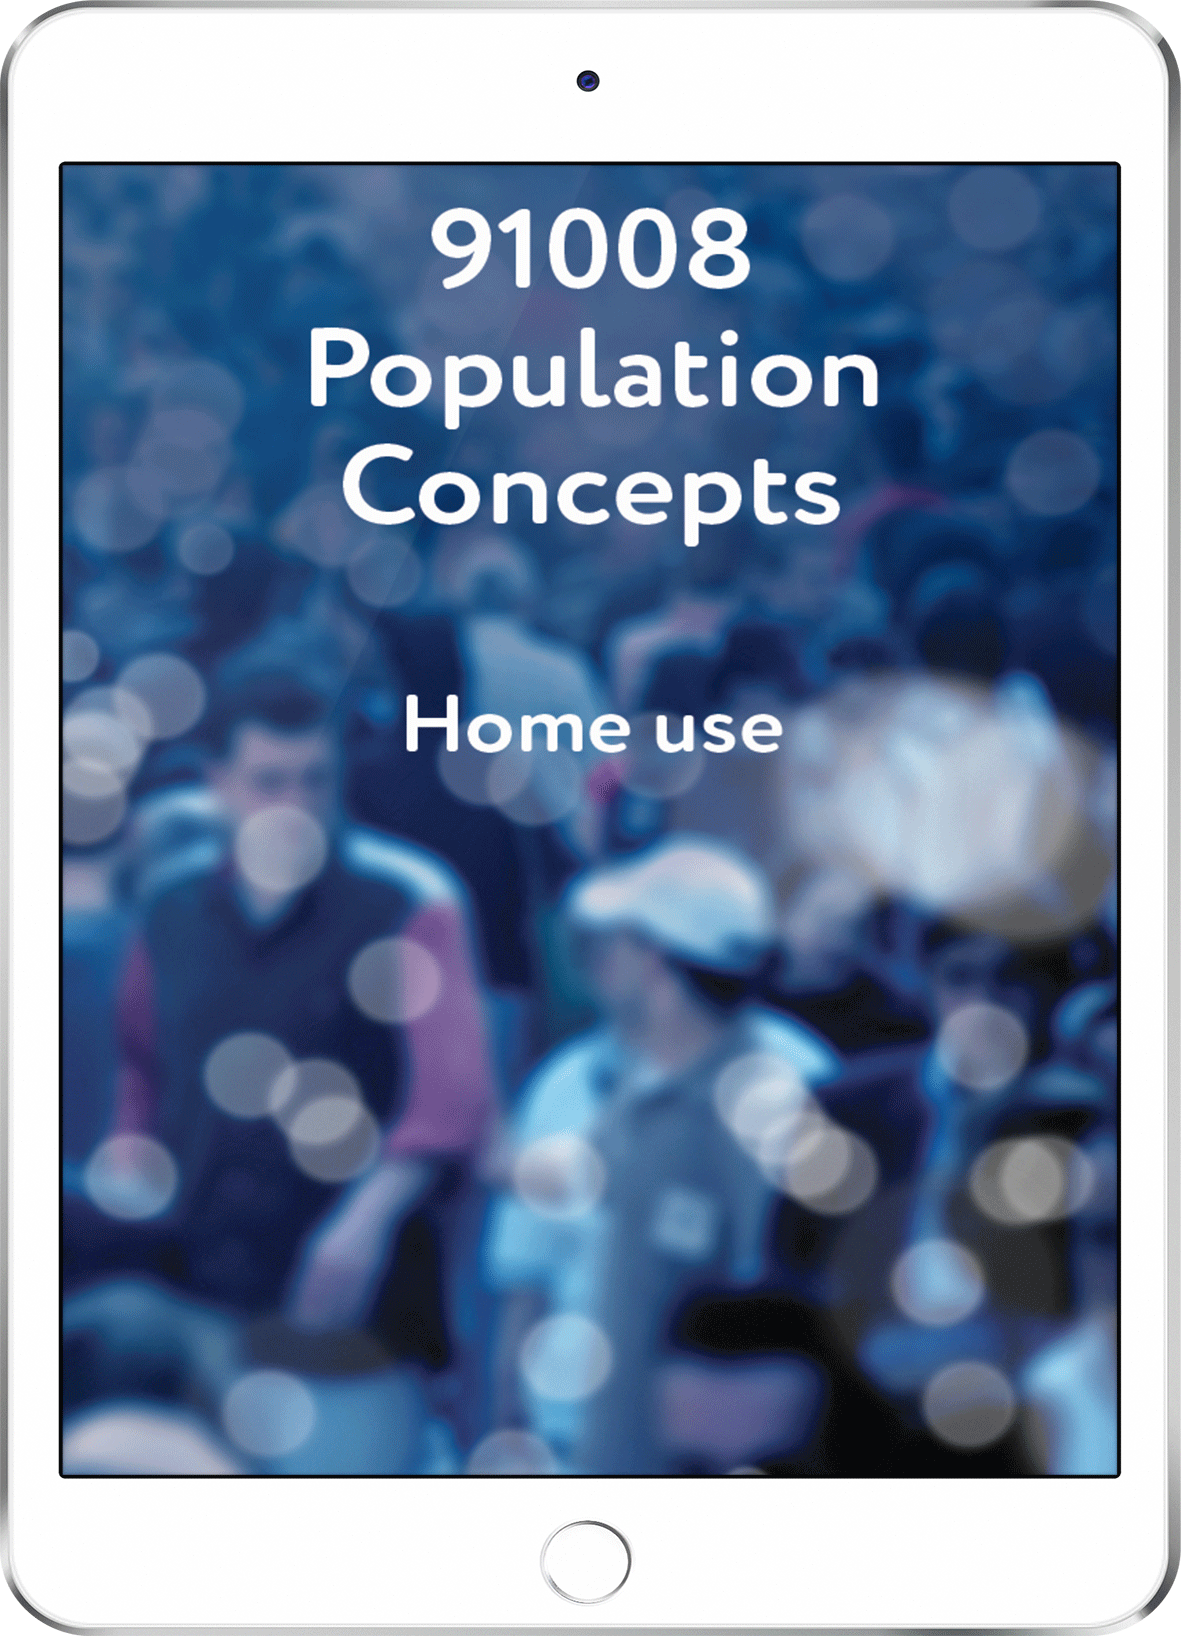 91008 Population Concepts - Home Use